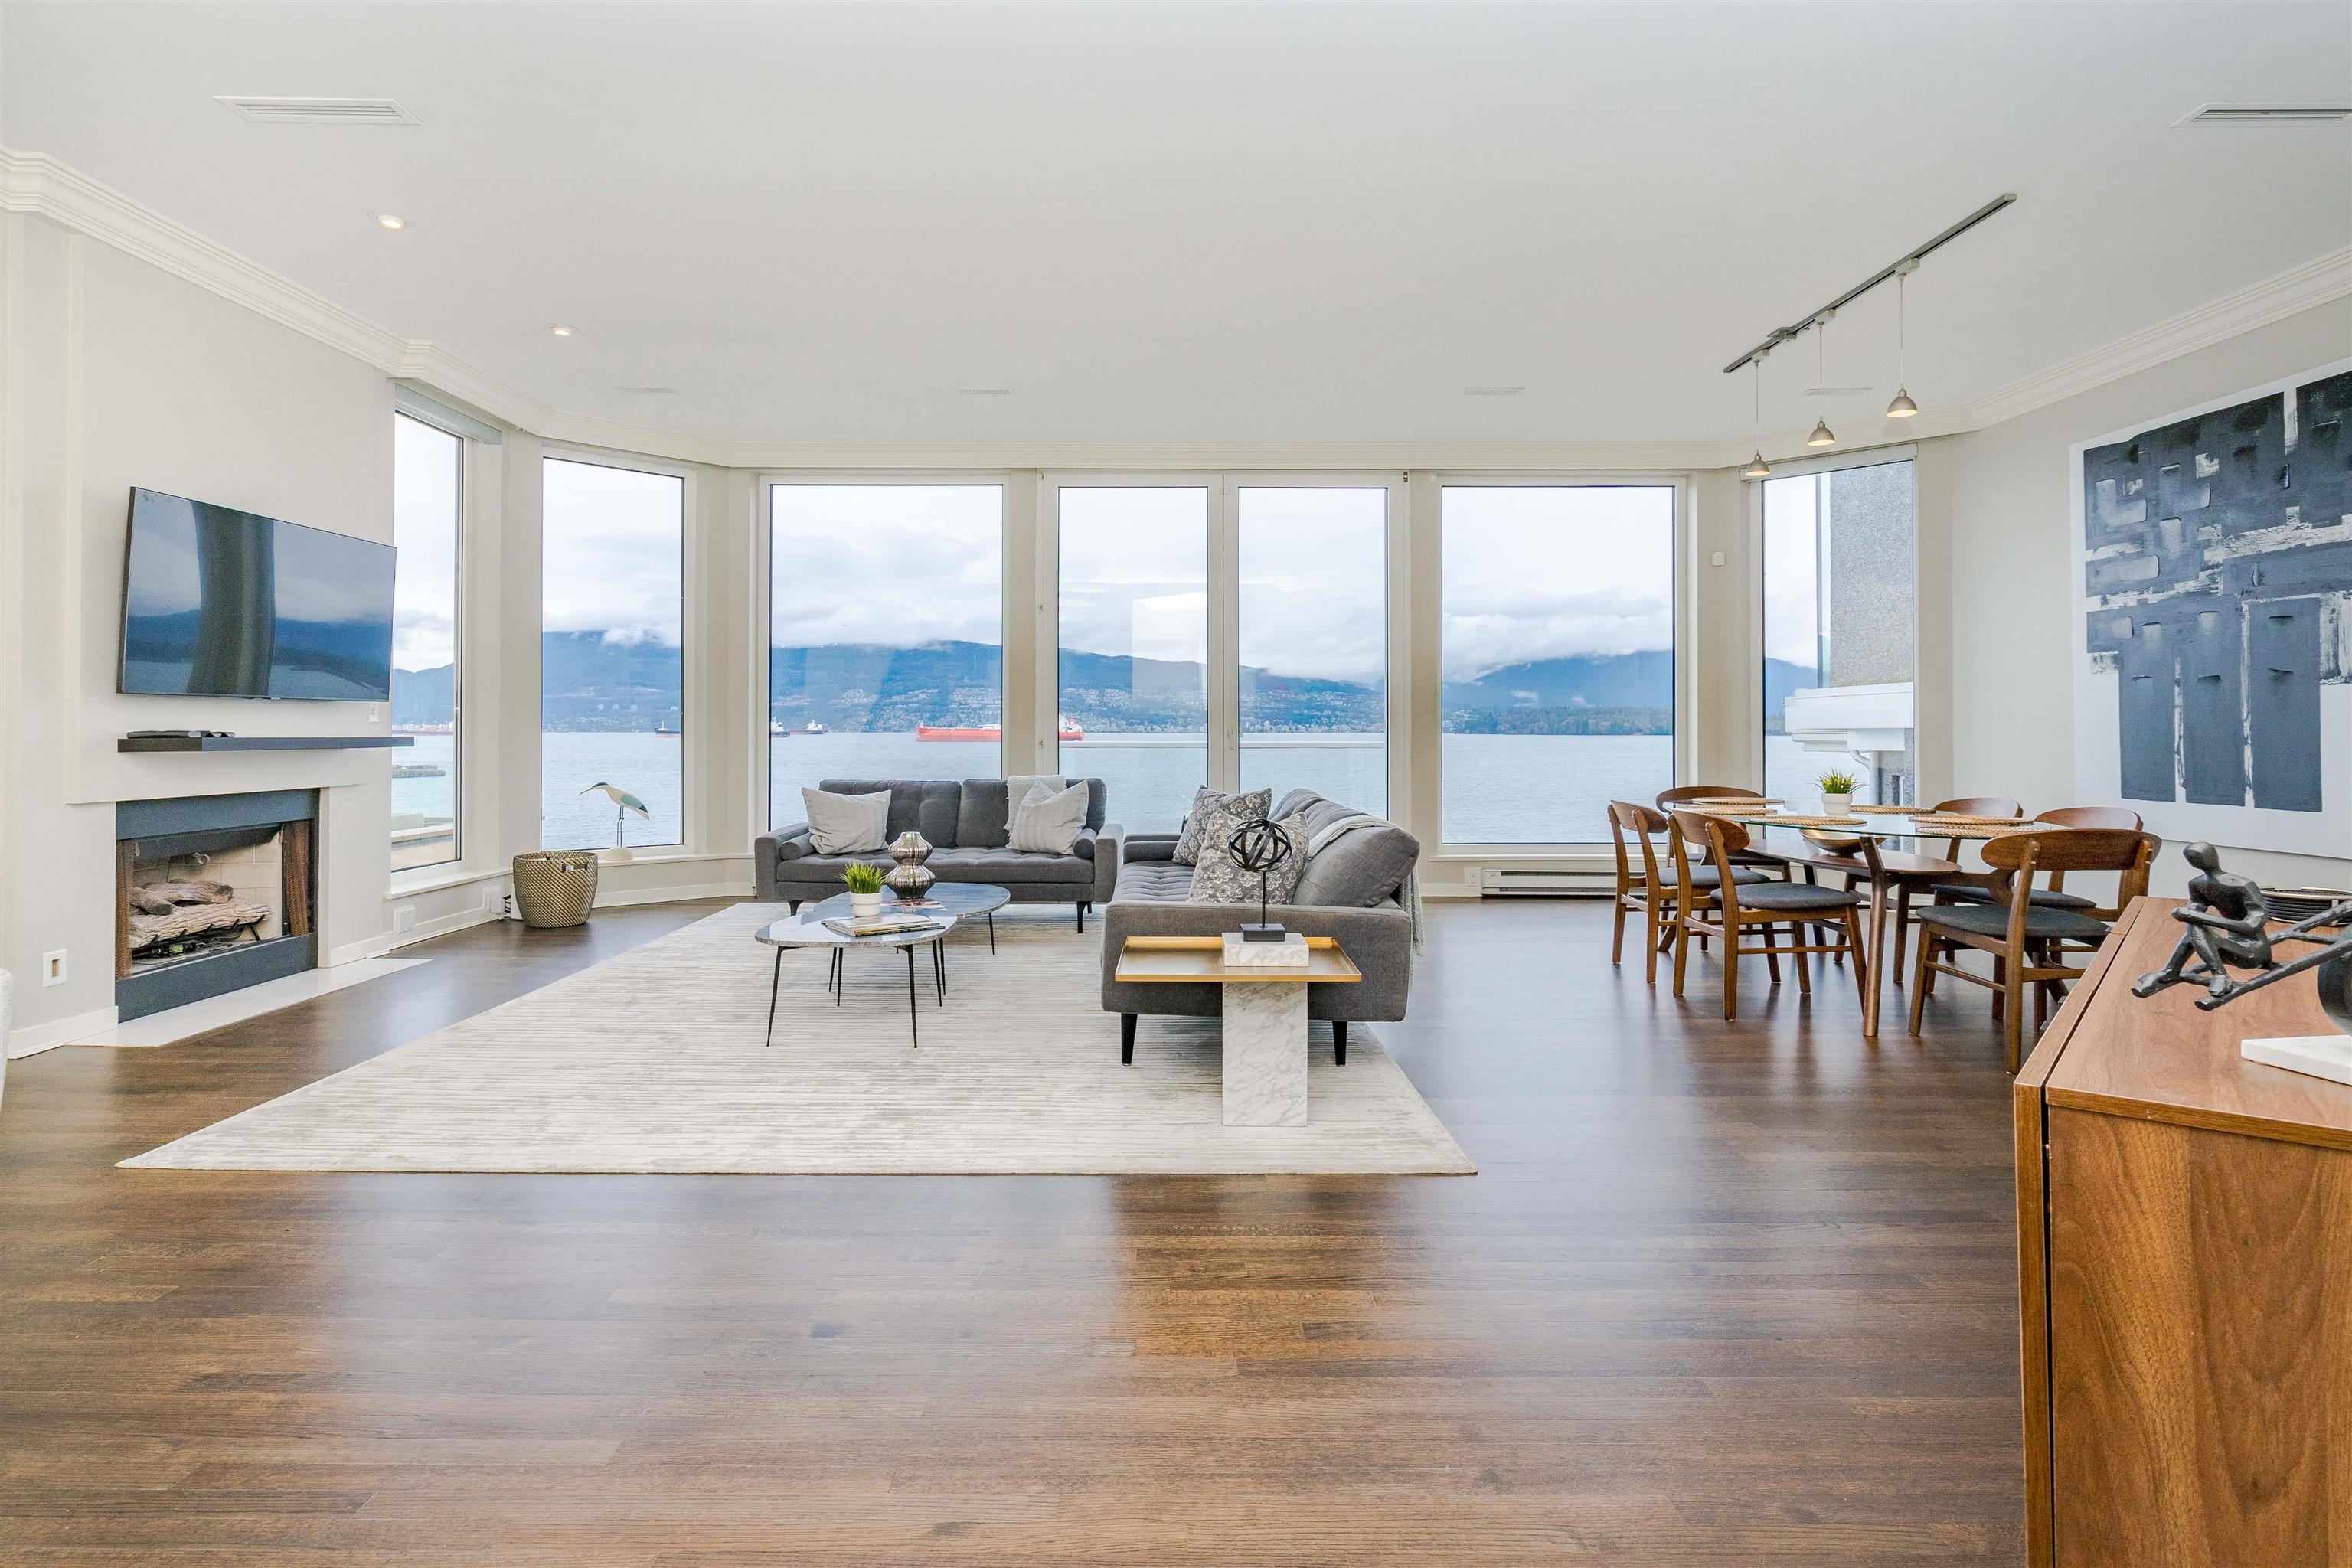 Listing image of 3341 POINT GREY ROAD